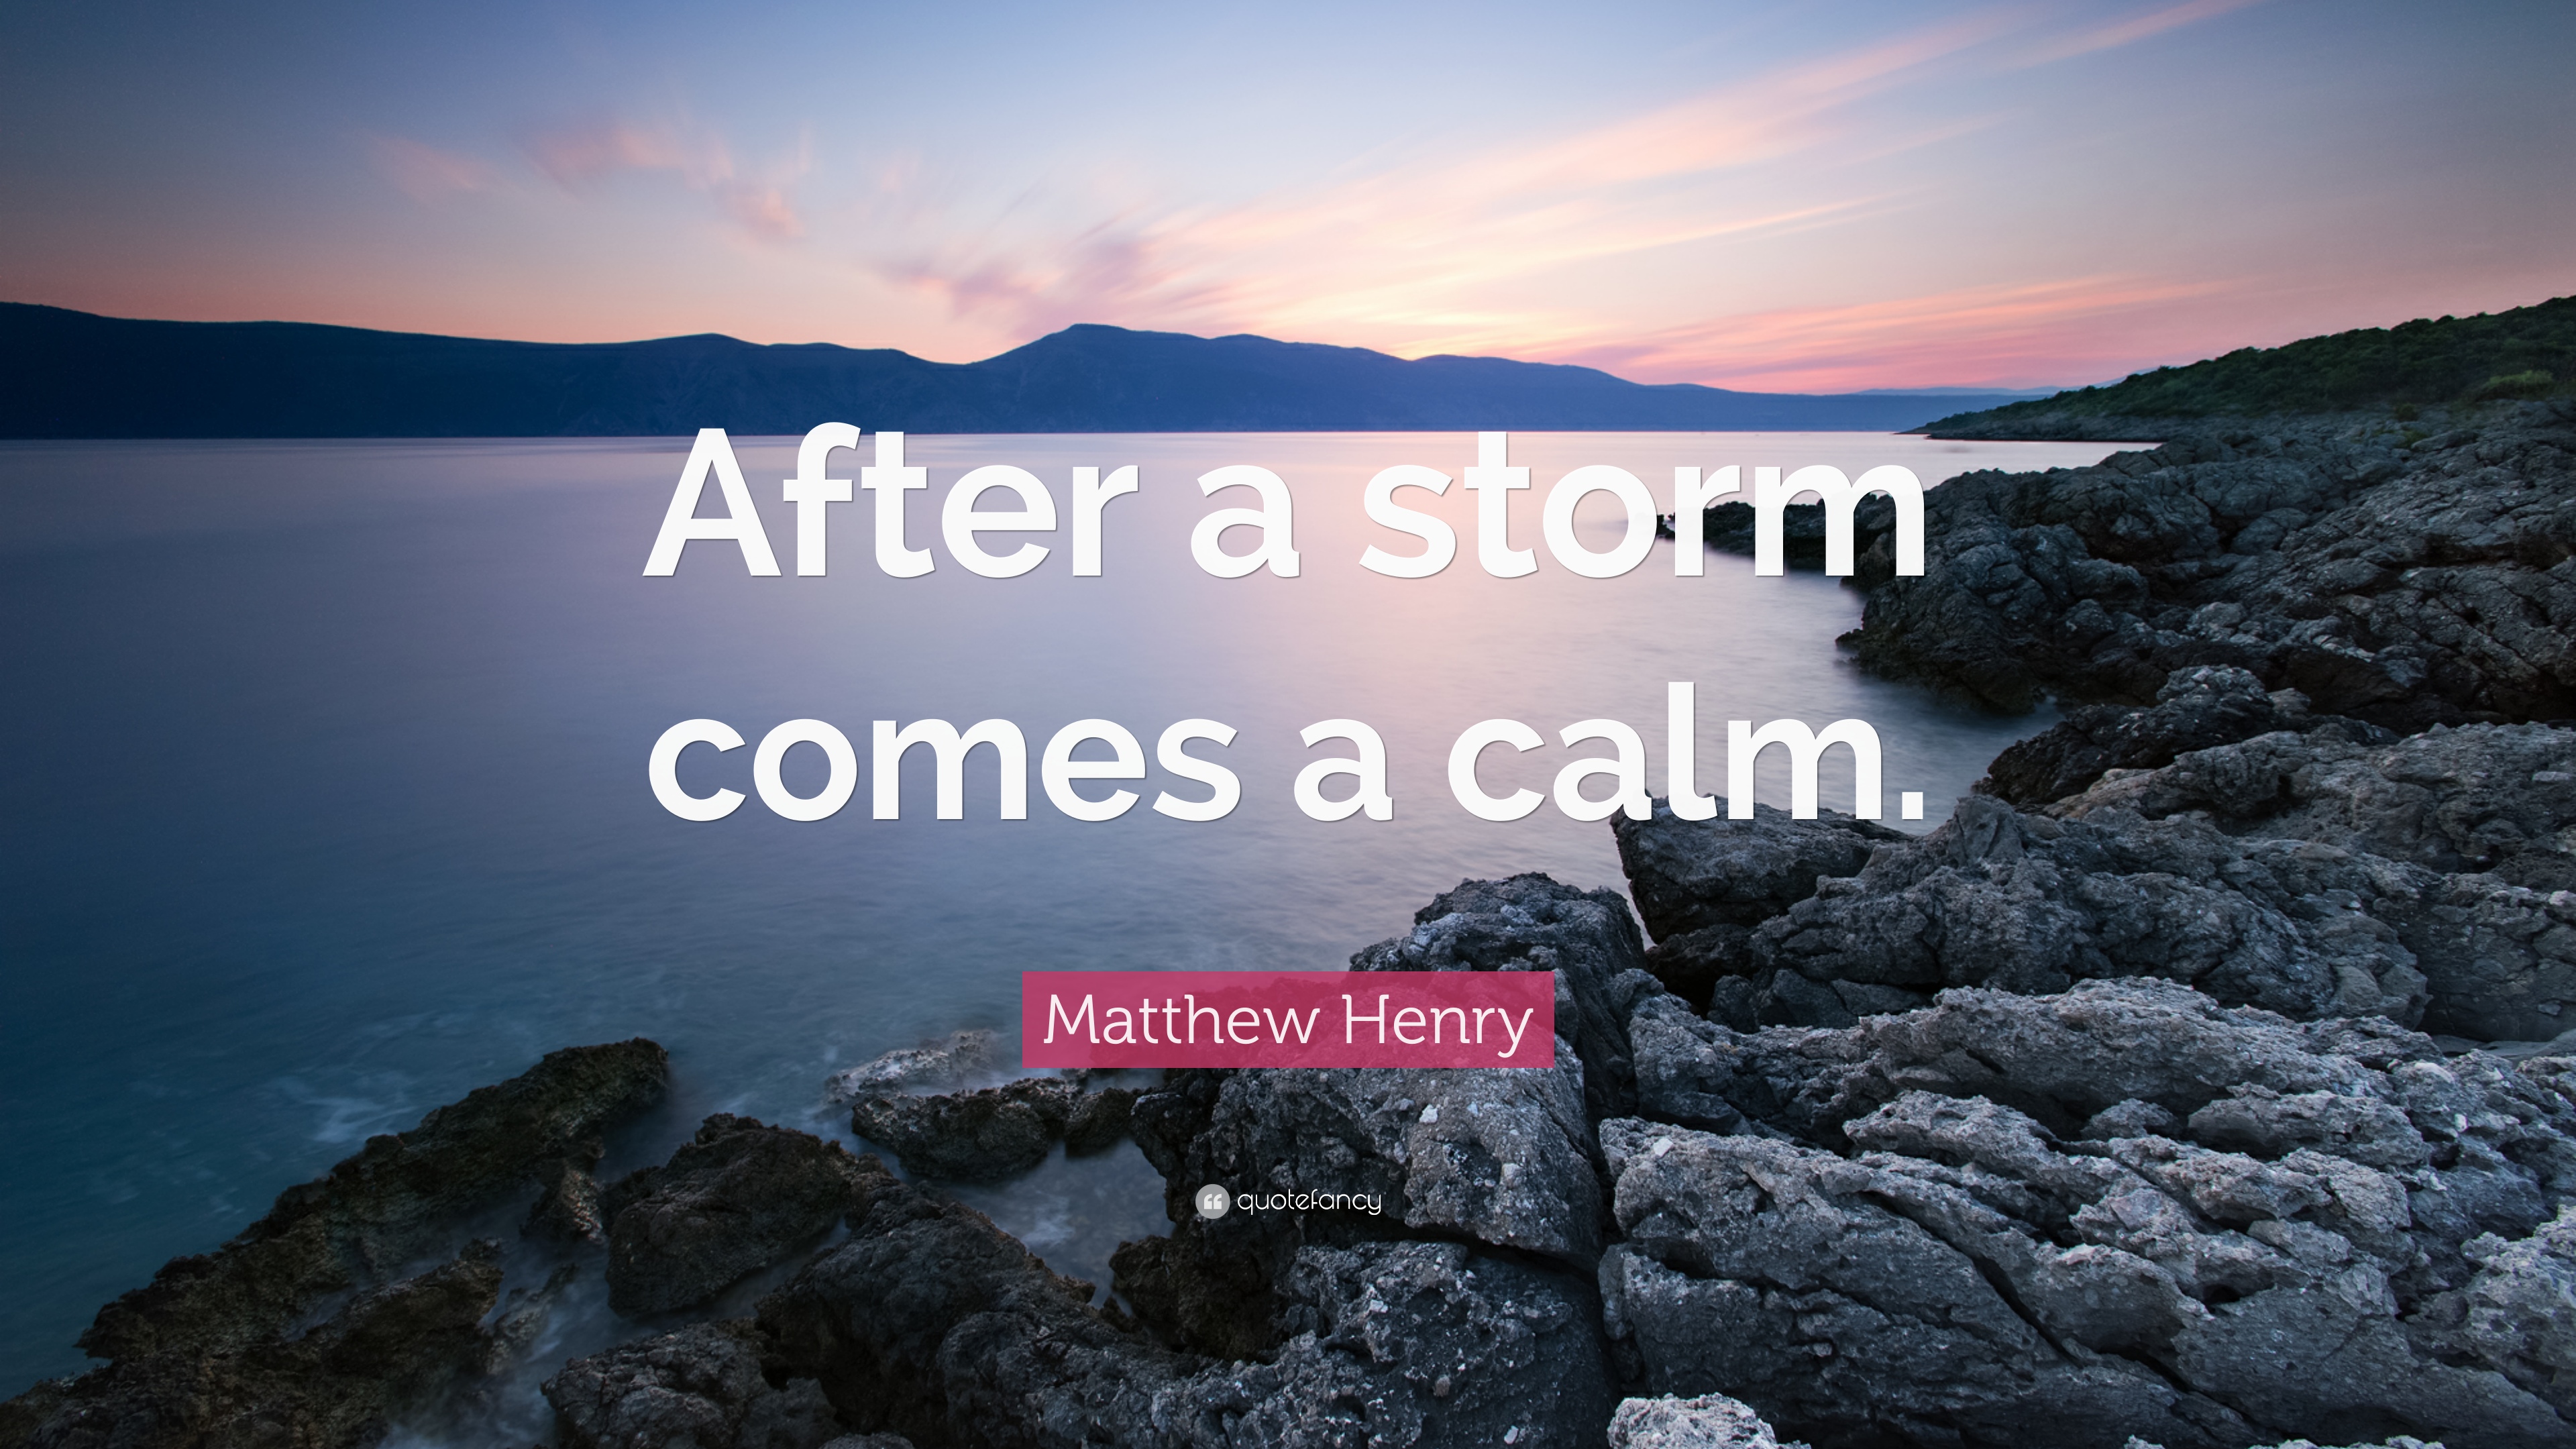 Matthew Henry Quote: “After a storm comes a calm.” 7